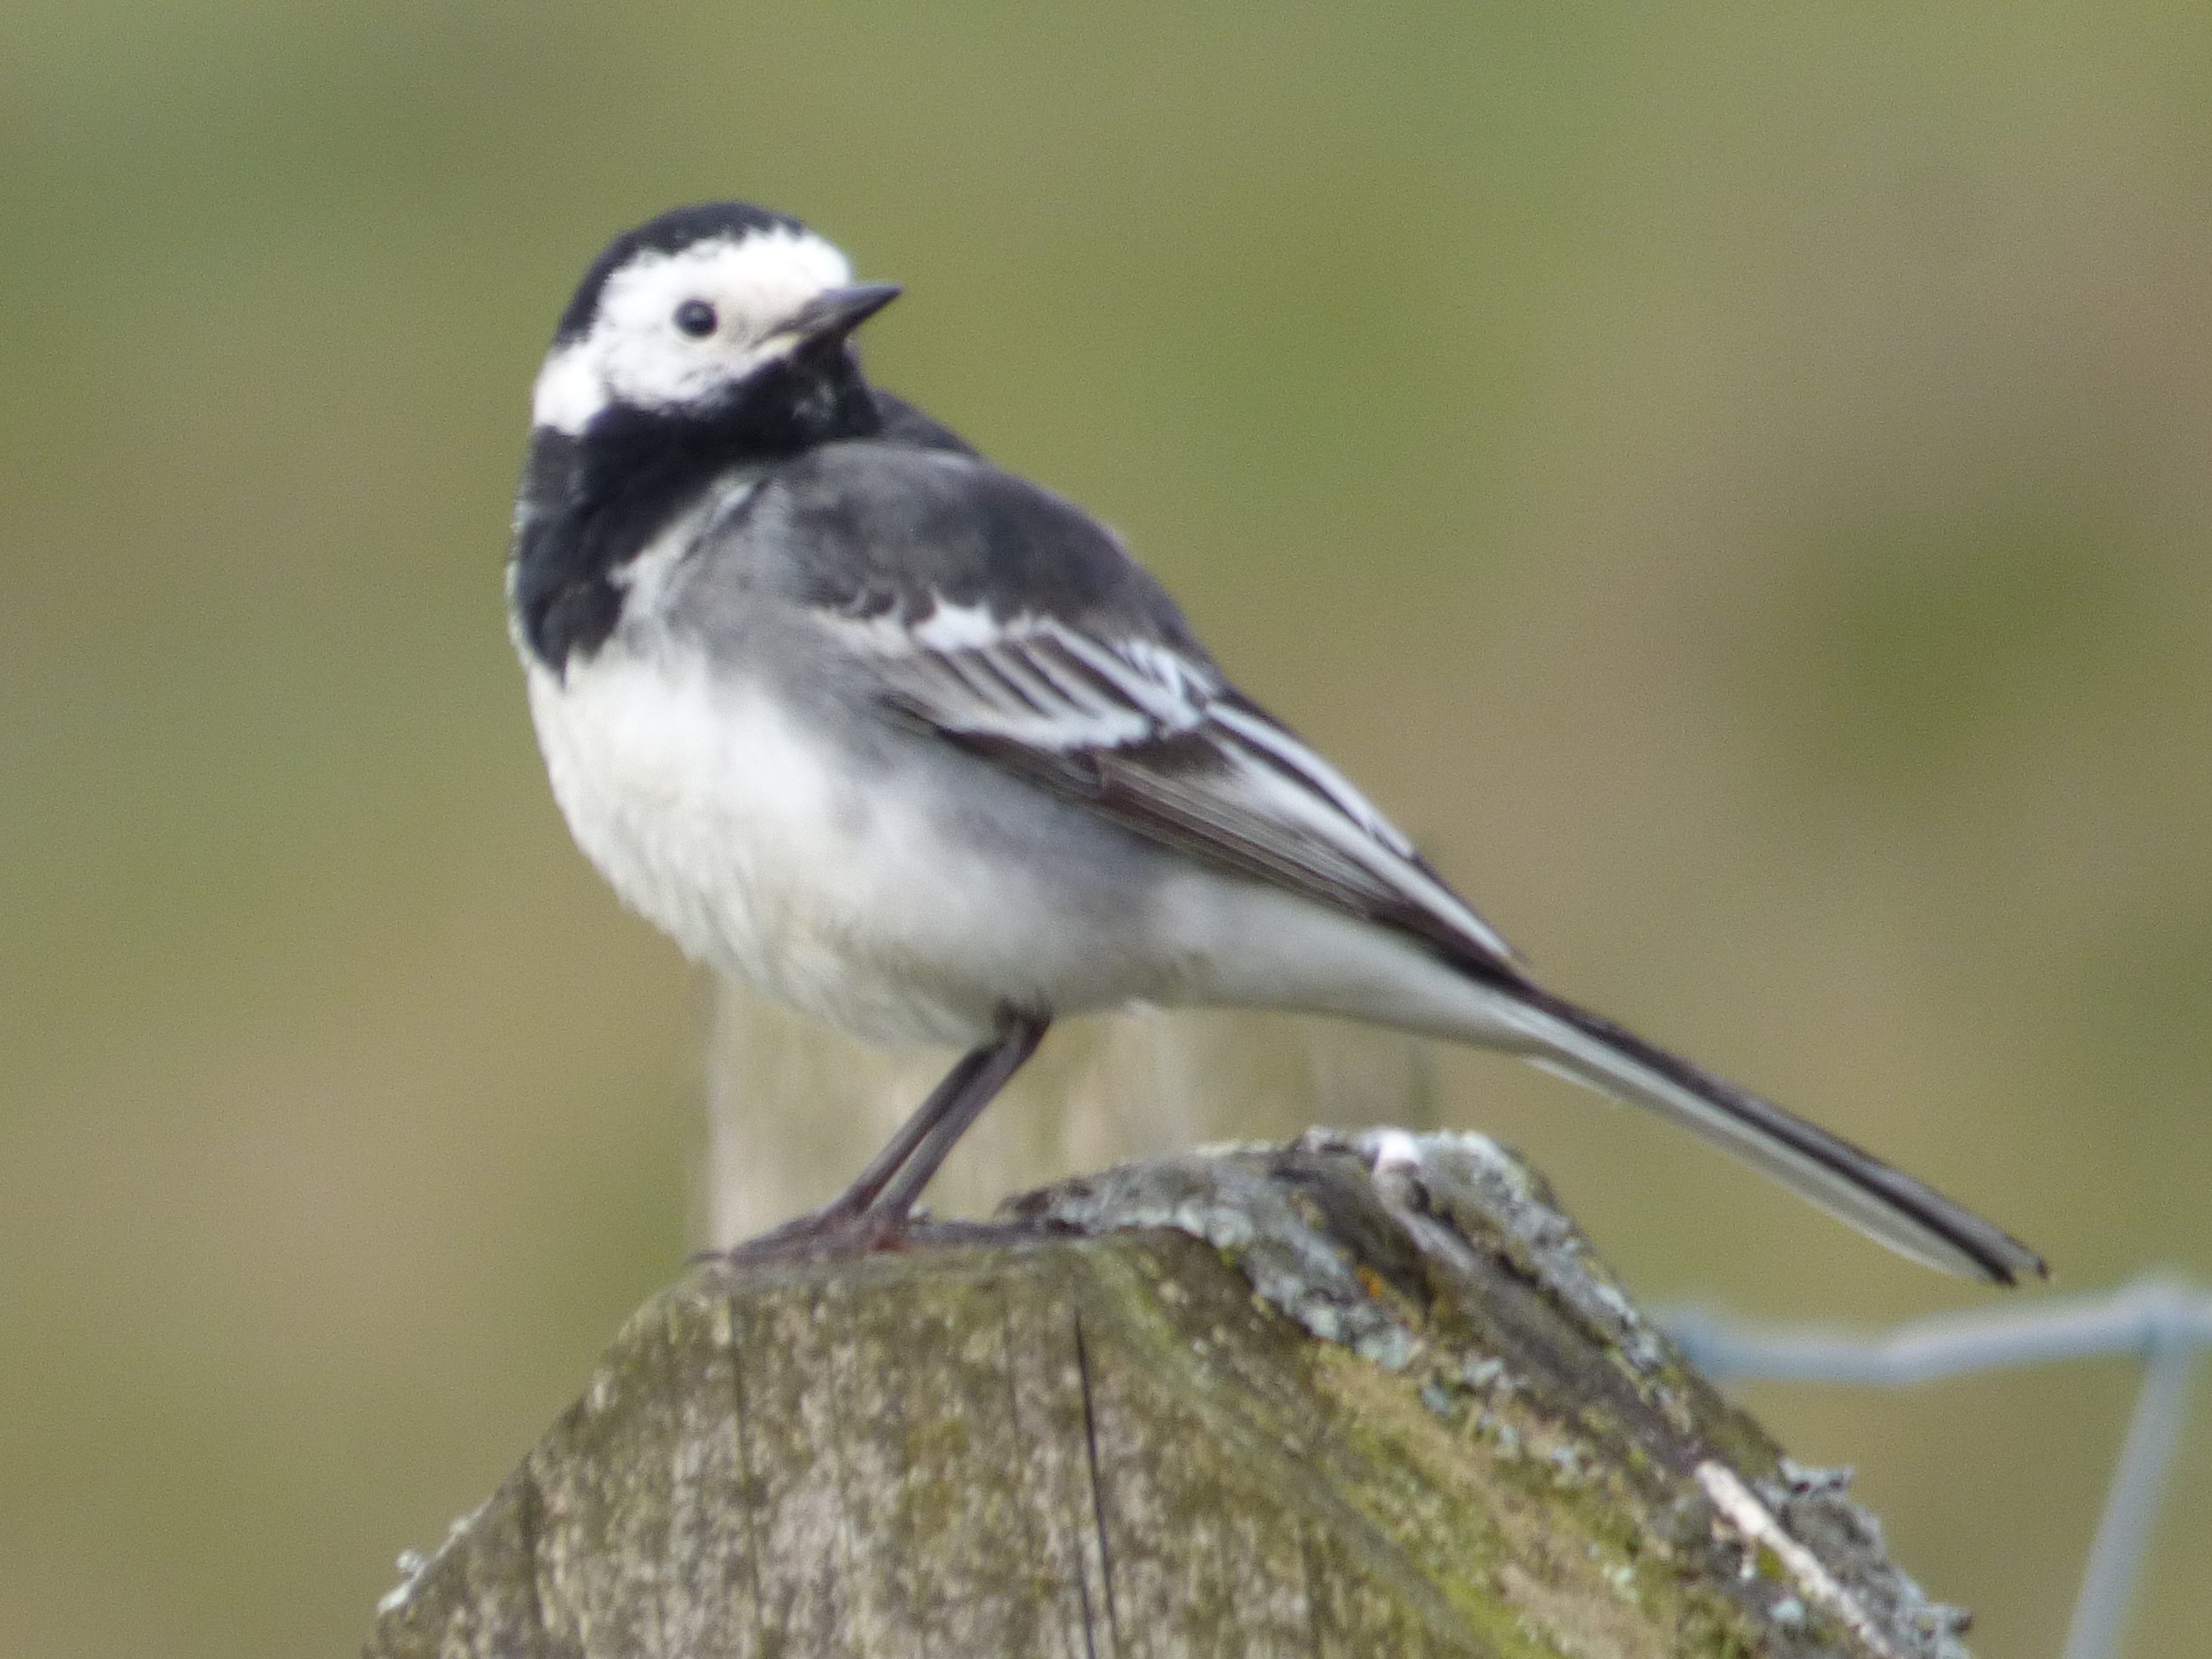 Pied wagtail